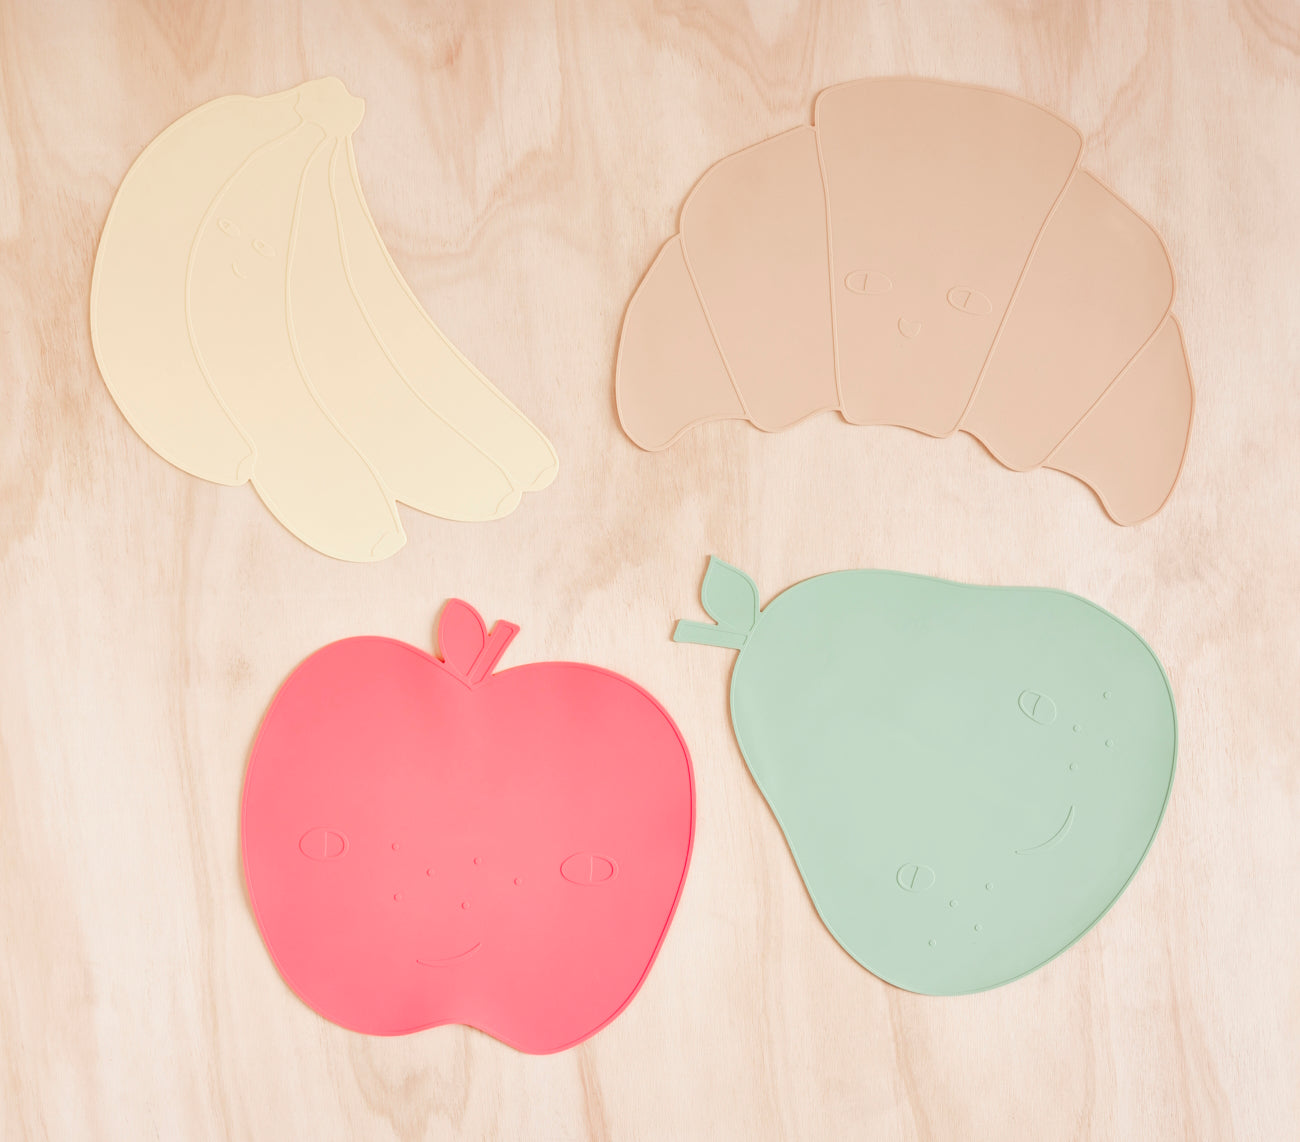 OYOY Placemat Pear